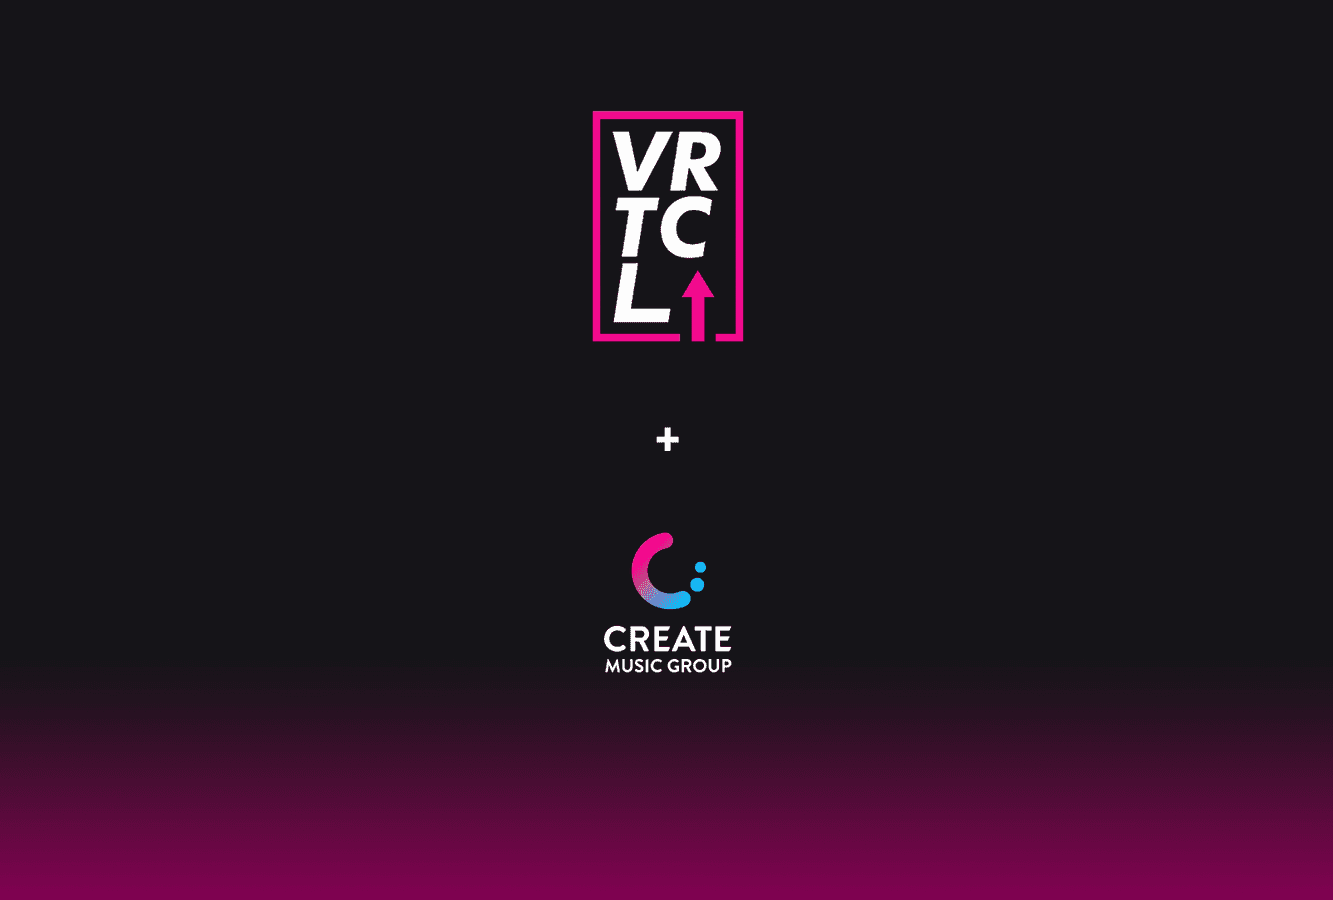 Create Music Group acquires VRTCL